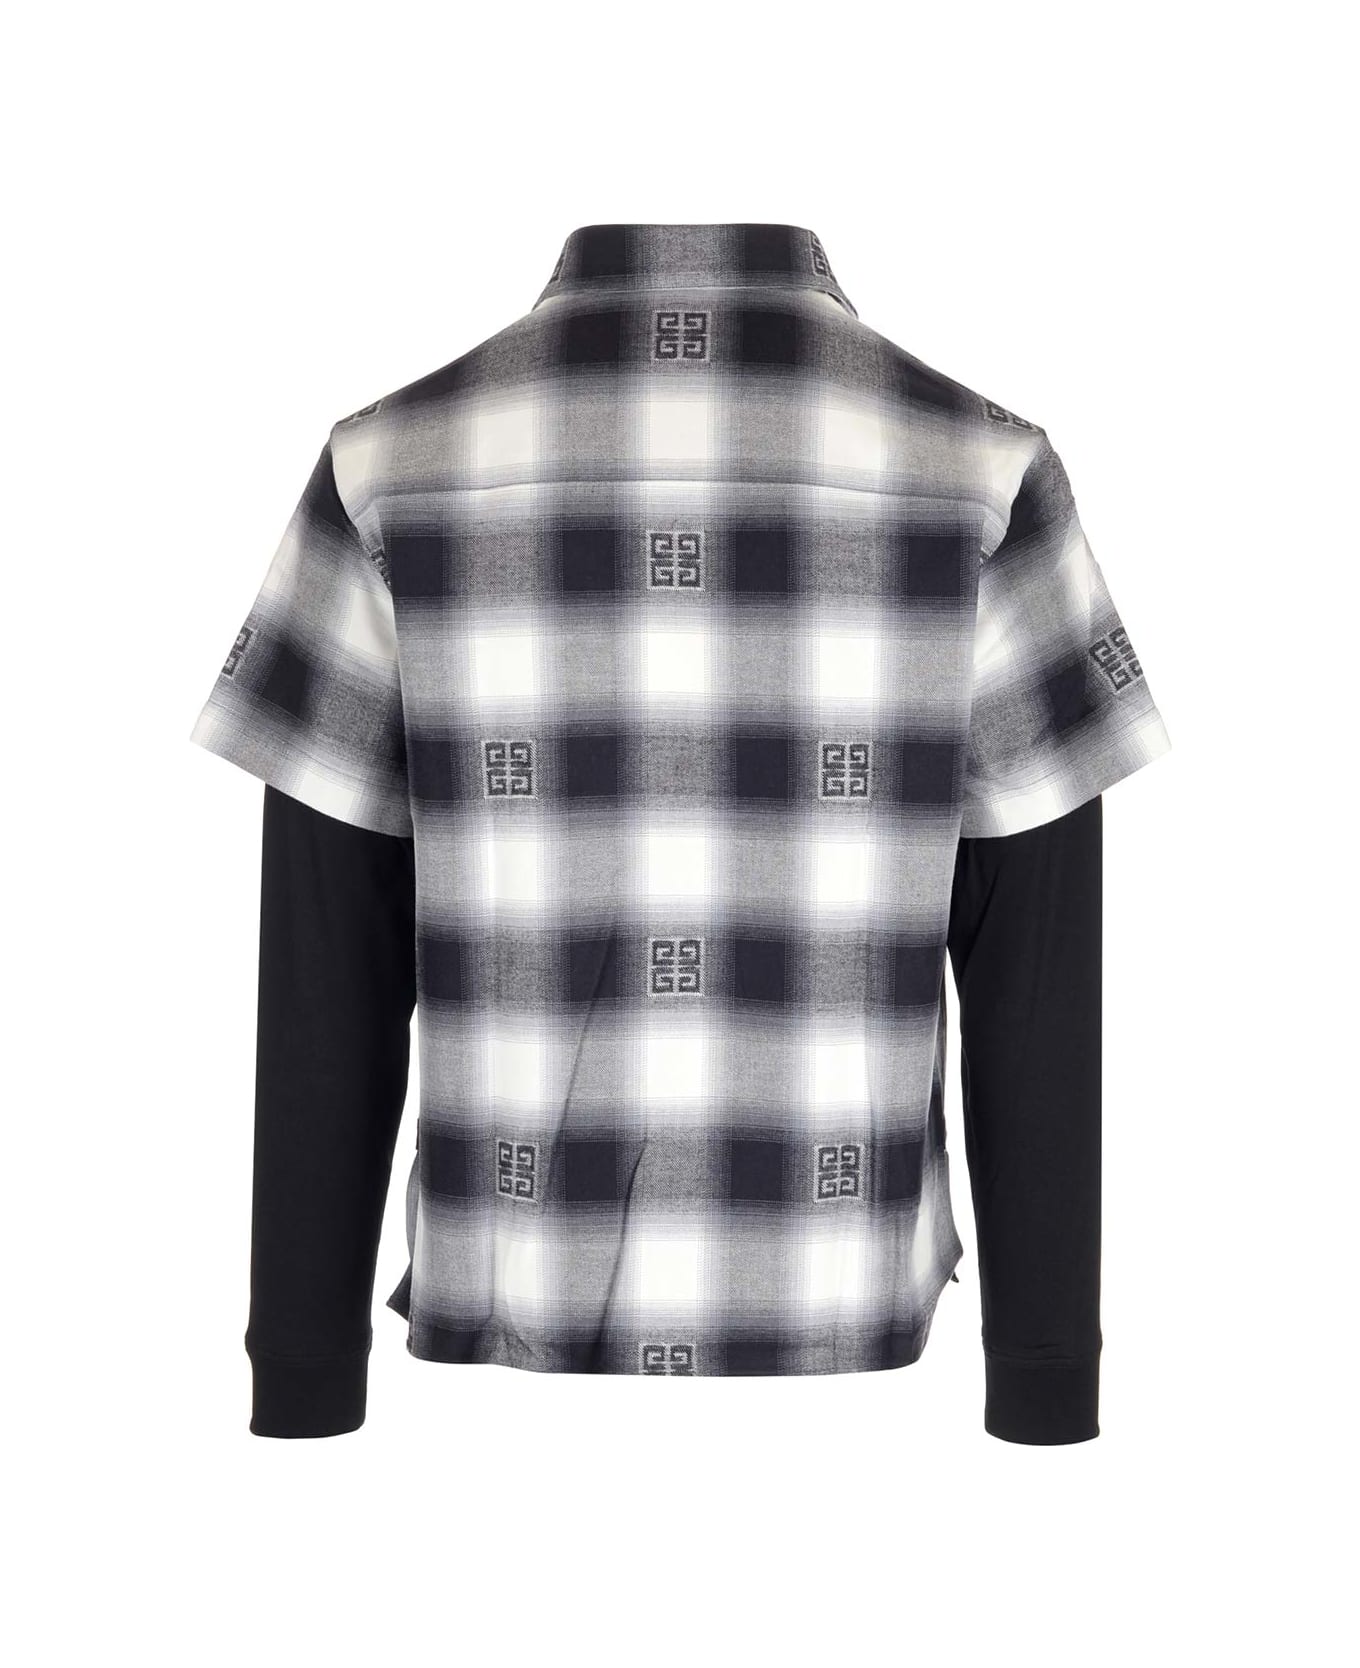 Givenchy Flannel Shirt - Multicolor シャツ